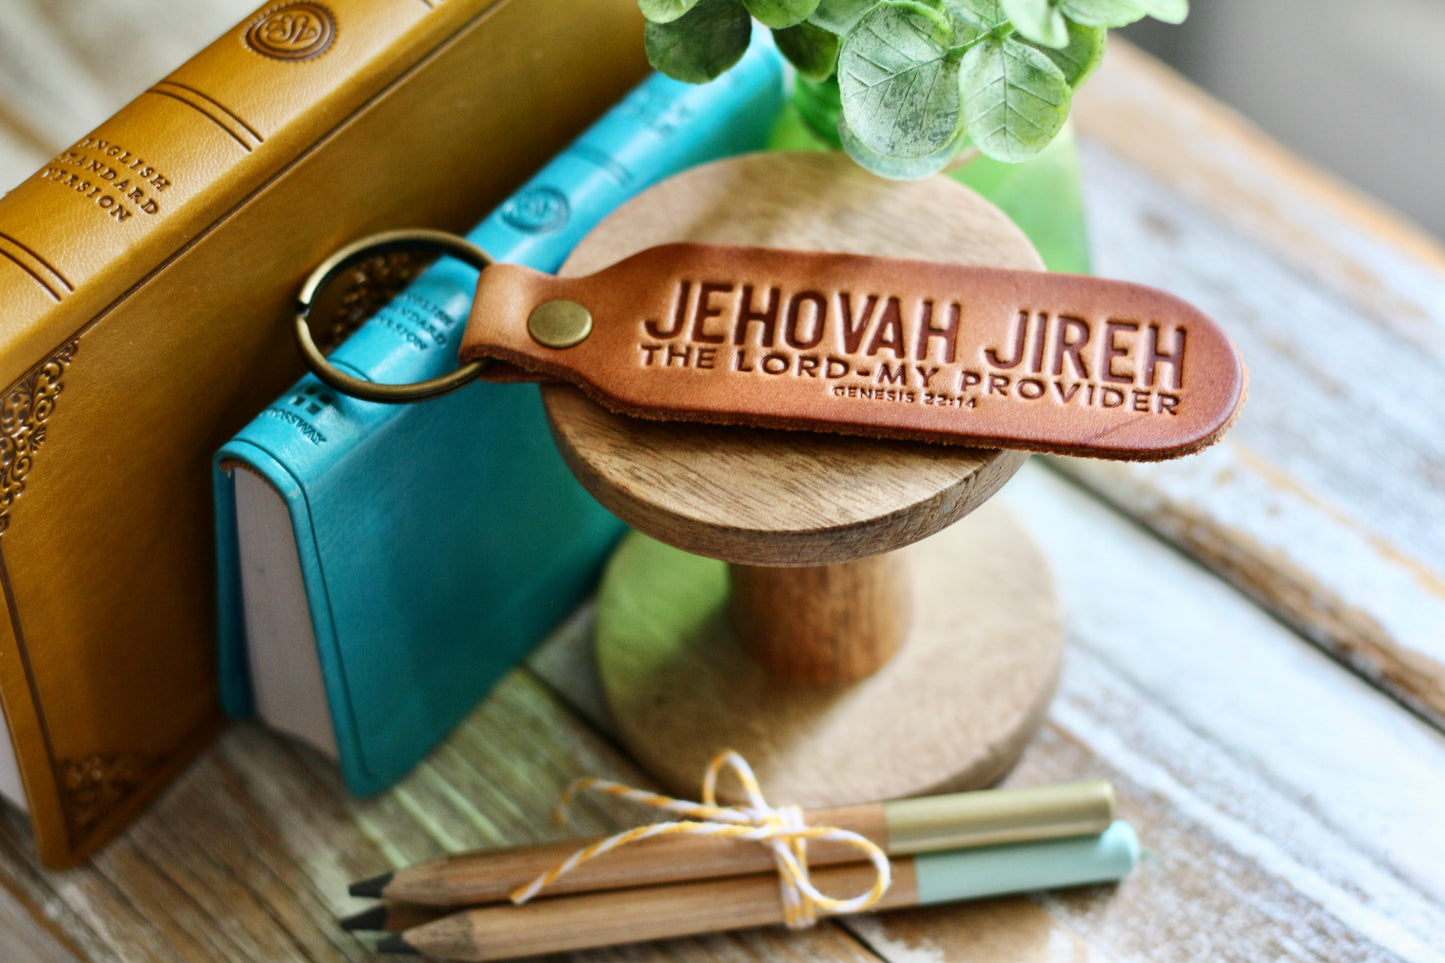 Jehovah Jireh - the Lord - my provider {Genesis 22:14} leather keyring (camel/natural)